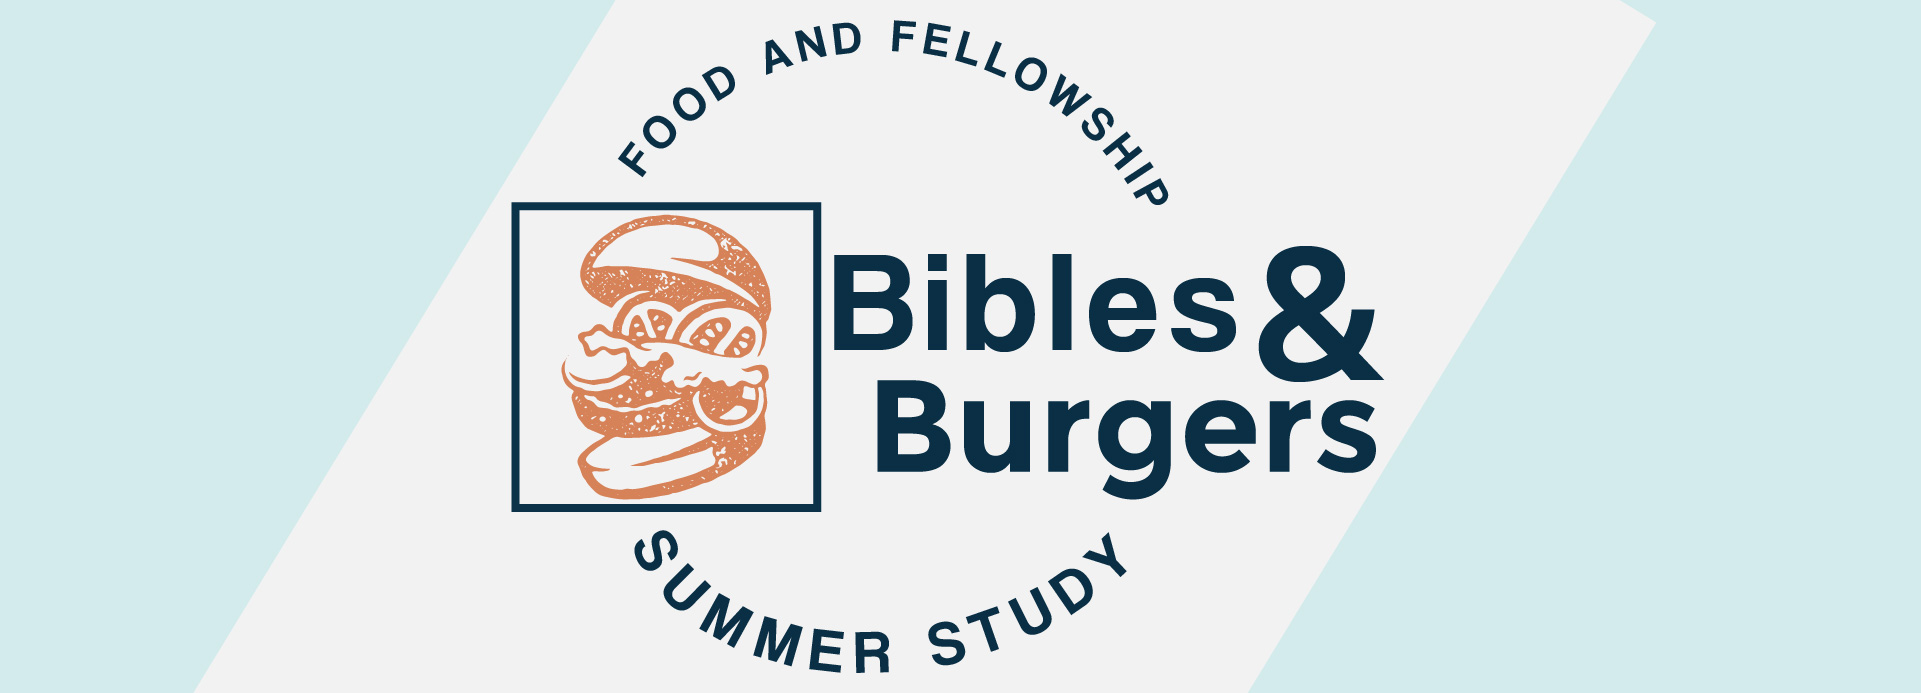 bibles-and-burgers-1920-banner